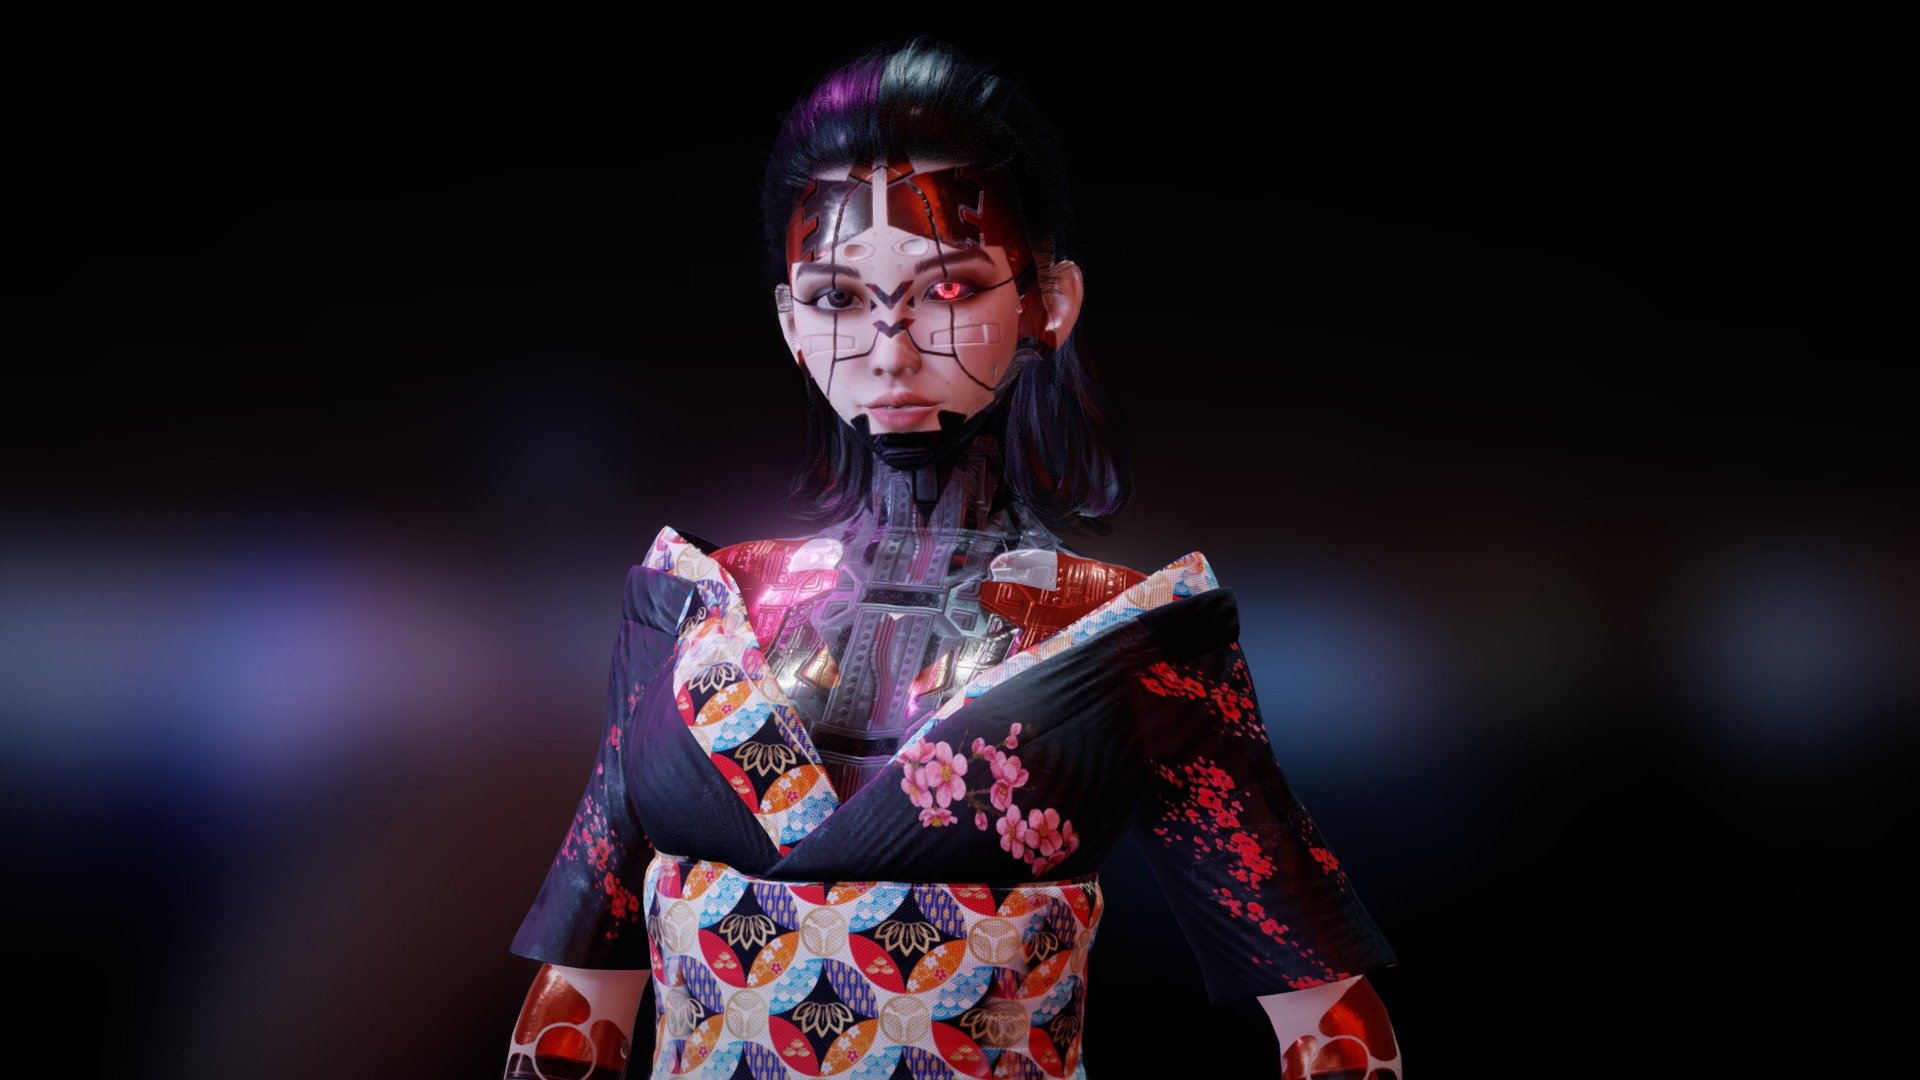 CYBER GEISHA BY Oscar creativo
Programs ZBRUSH-SUBSTANCE PAINTER-MARMOSET TOOLBAG
Oscarcreativo.co-all rights reserved

full proyect: https://www.behance.net/gallery/147768259/CYBER-GEISHA-3D-MODEL-BY-Oscar-creativo - CYBER GEISHA V2 BY Oscar creativo - Buy Royalty Free 3D model by OSCAR CREATIVO (@oscar_creativo) 3d model